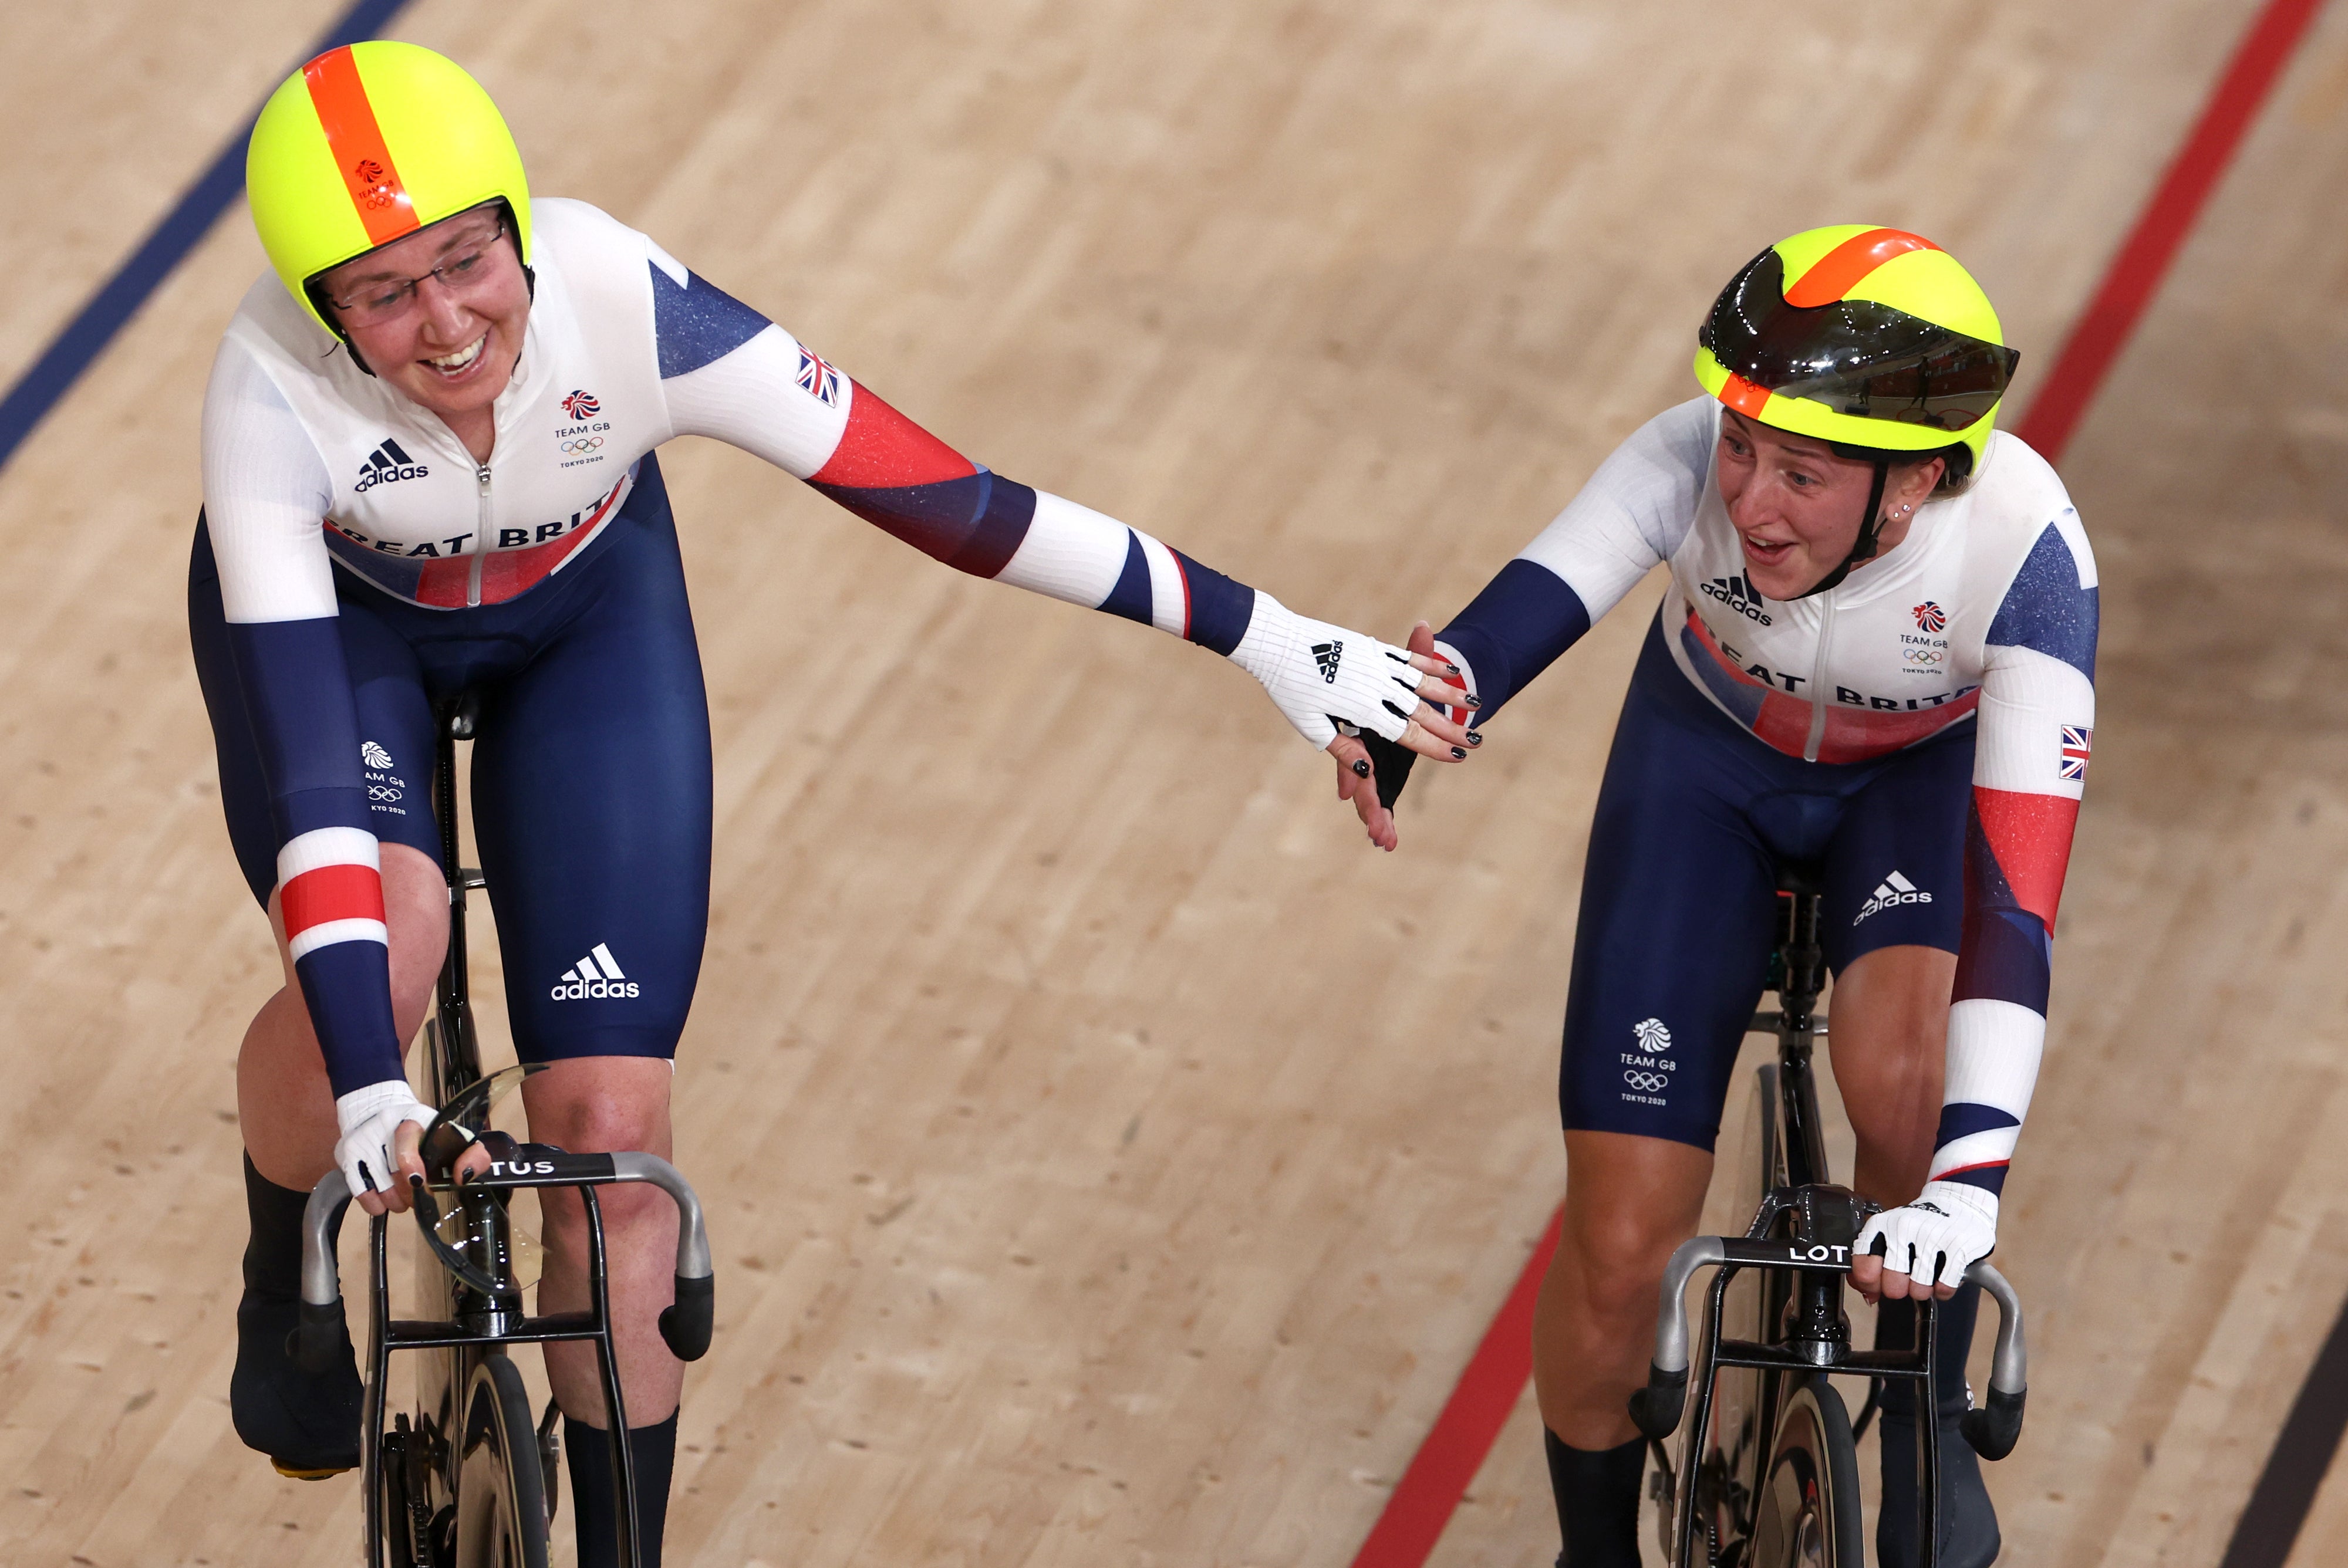 Katie Archibald and Laura Kenny produced a phenomenal ride